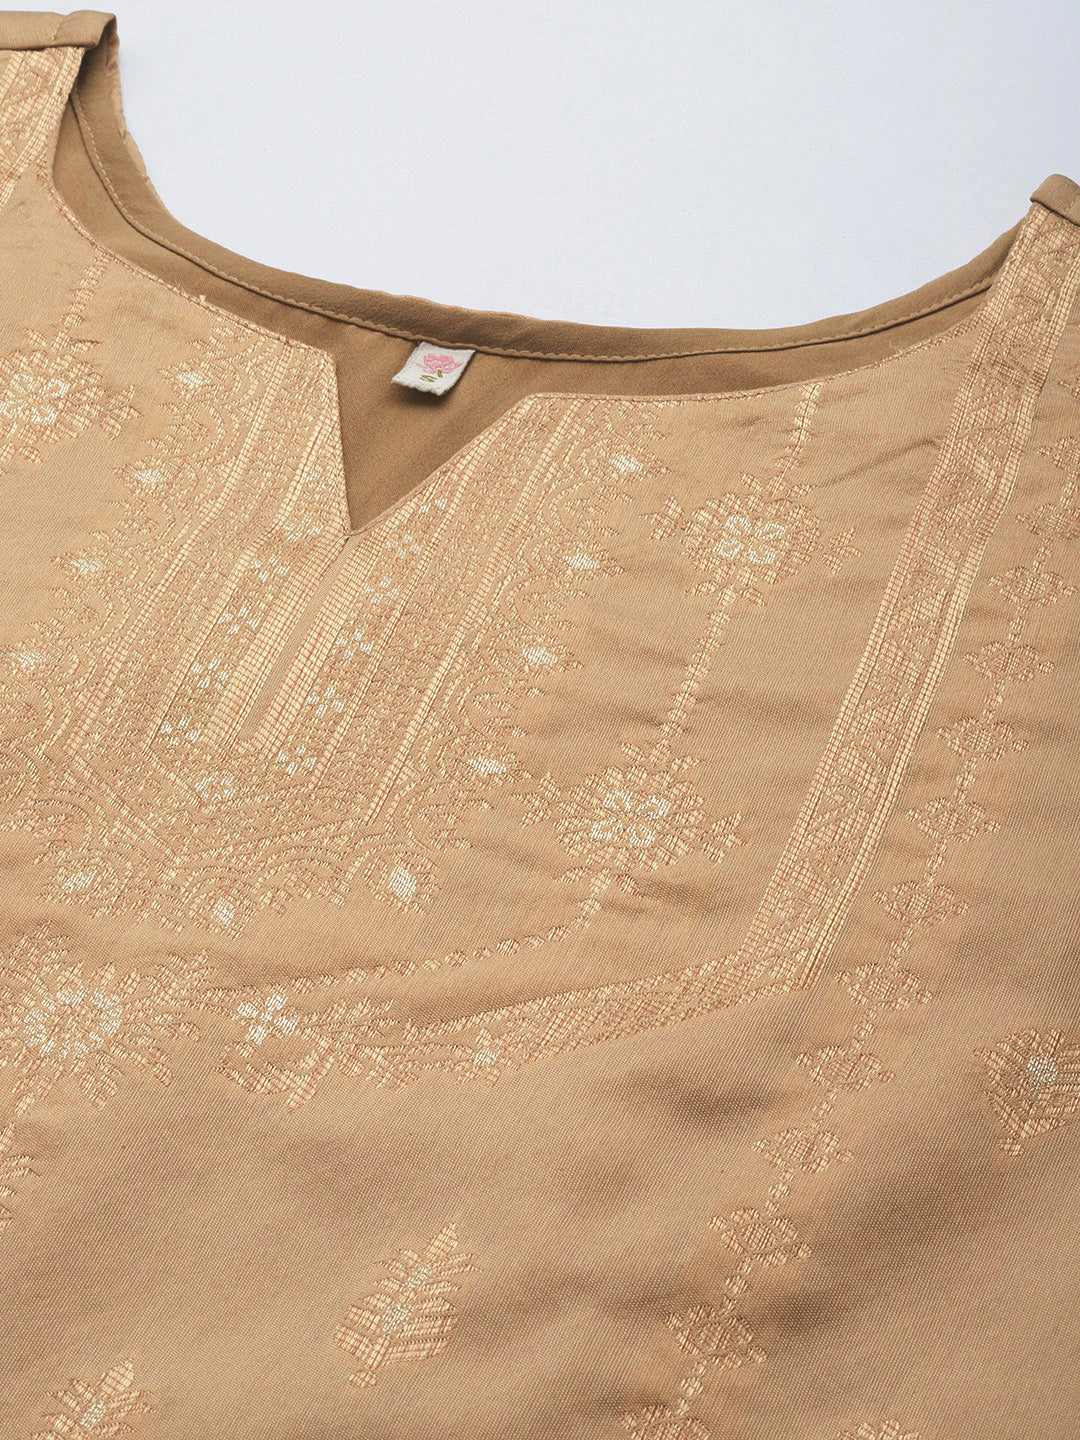 Tan & Gold Woven Design Ethnic Motifs Unstitched Dress Material